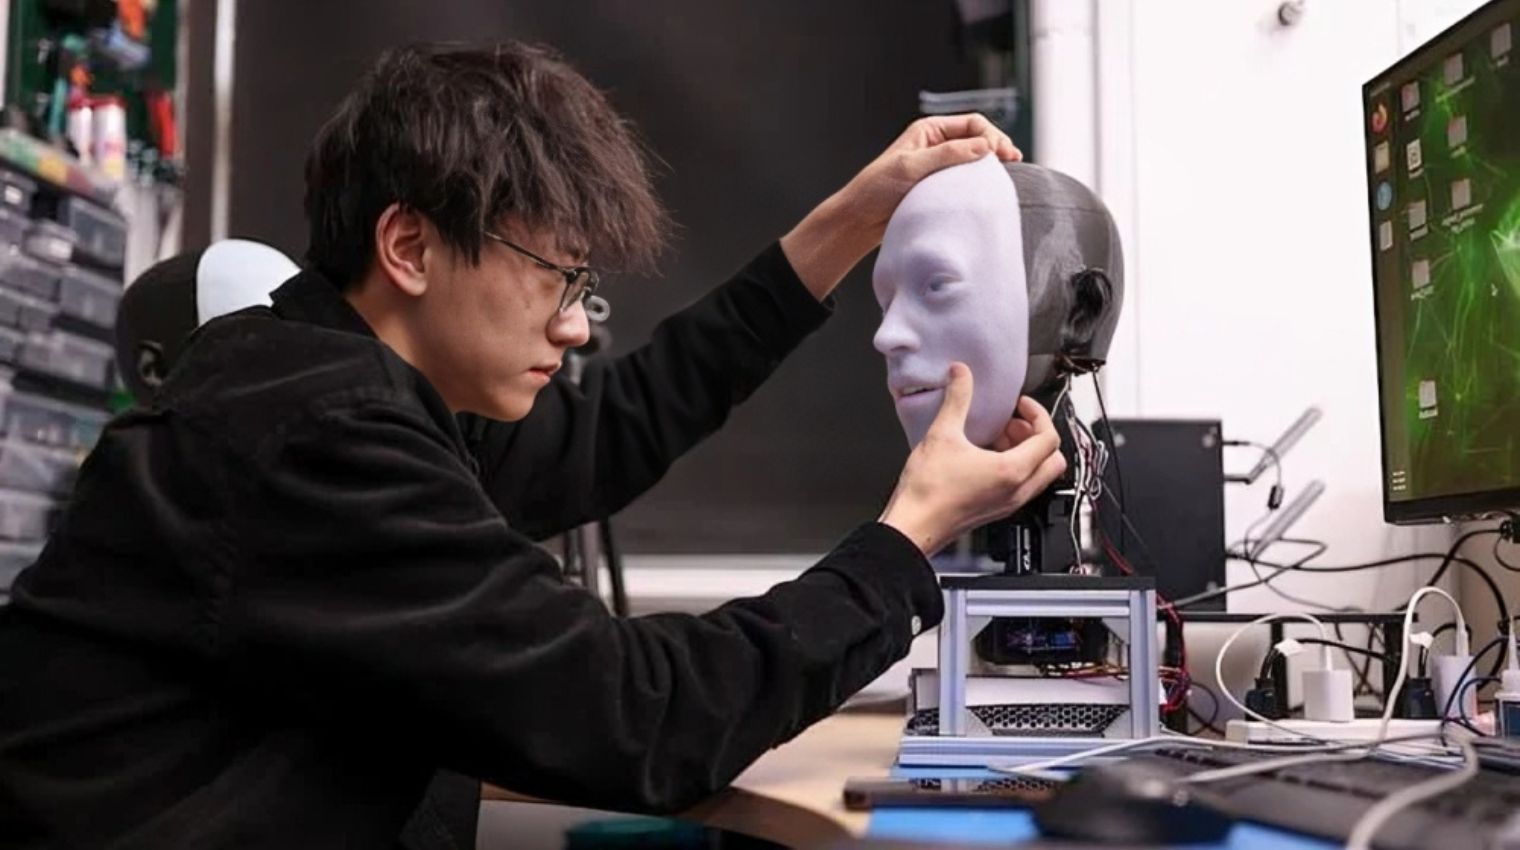 “Introducing Emo: The Humanoid Robot with Advanced Facial Expression Mimicry Capabilities”